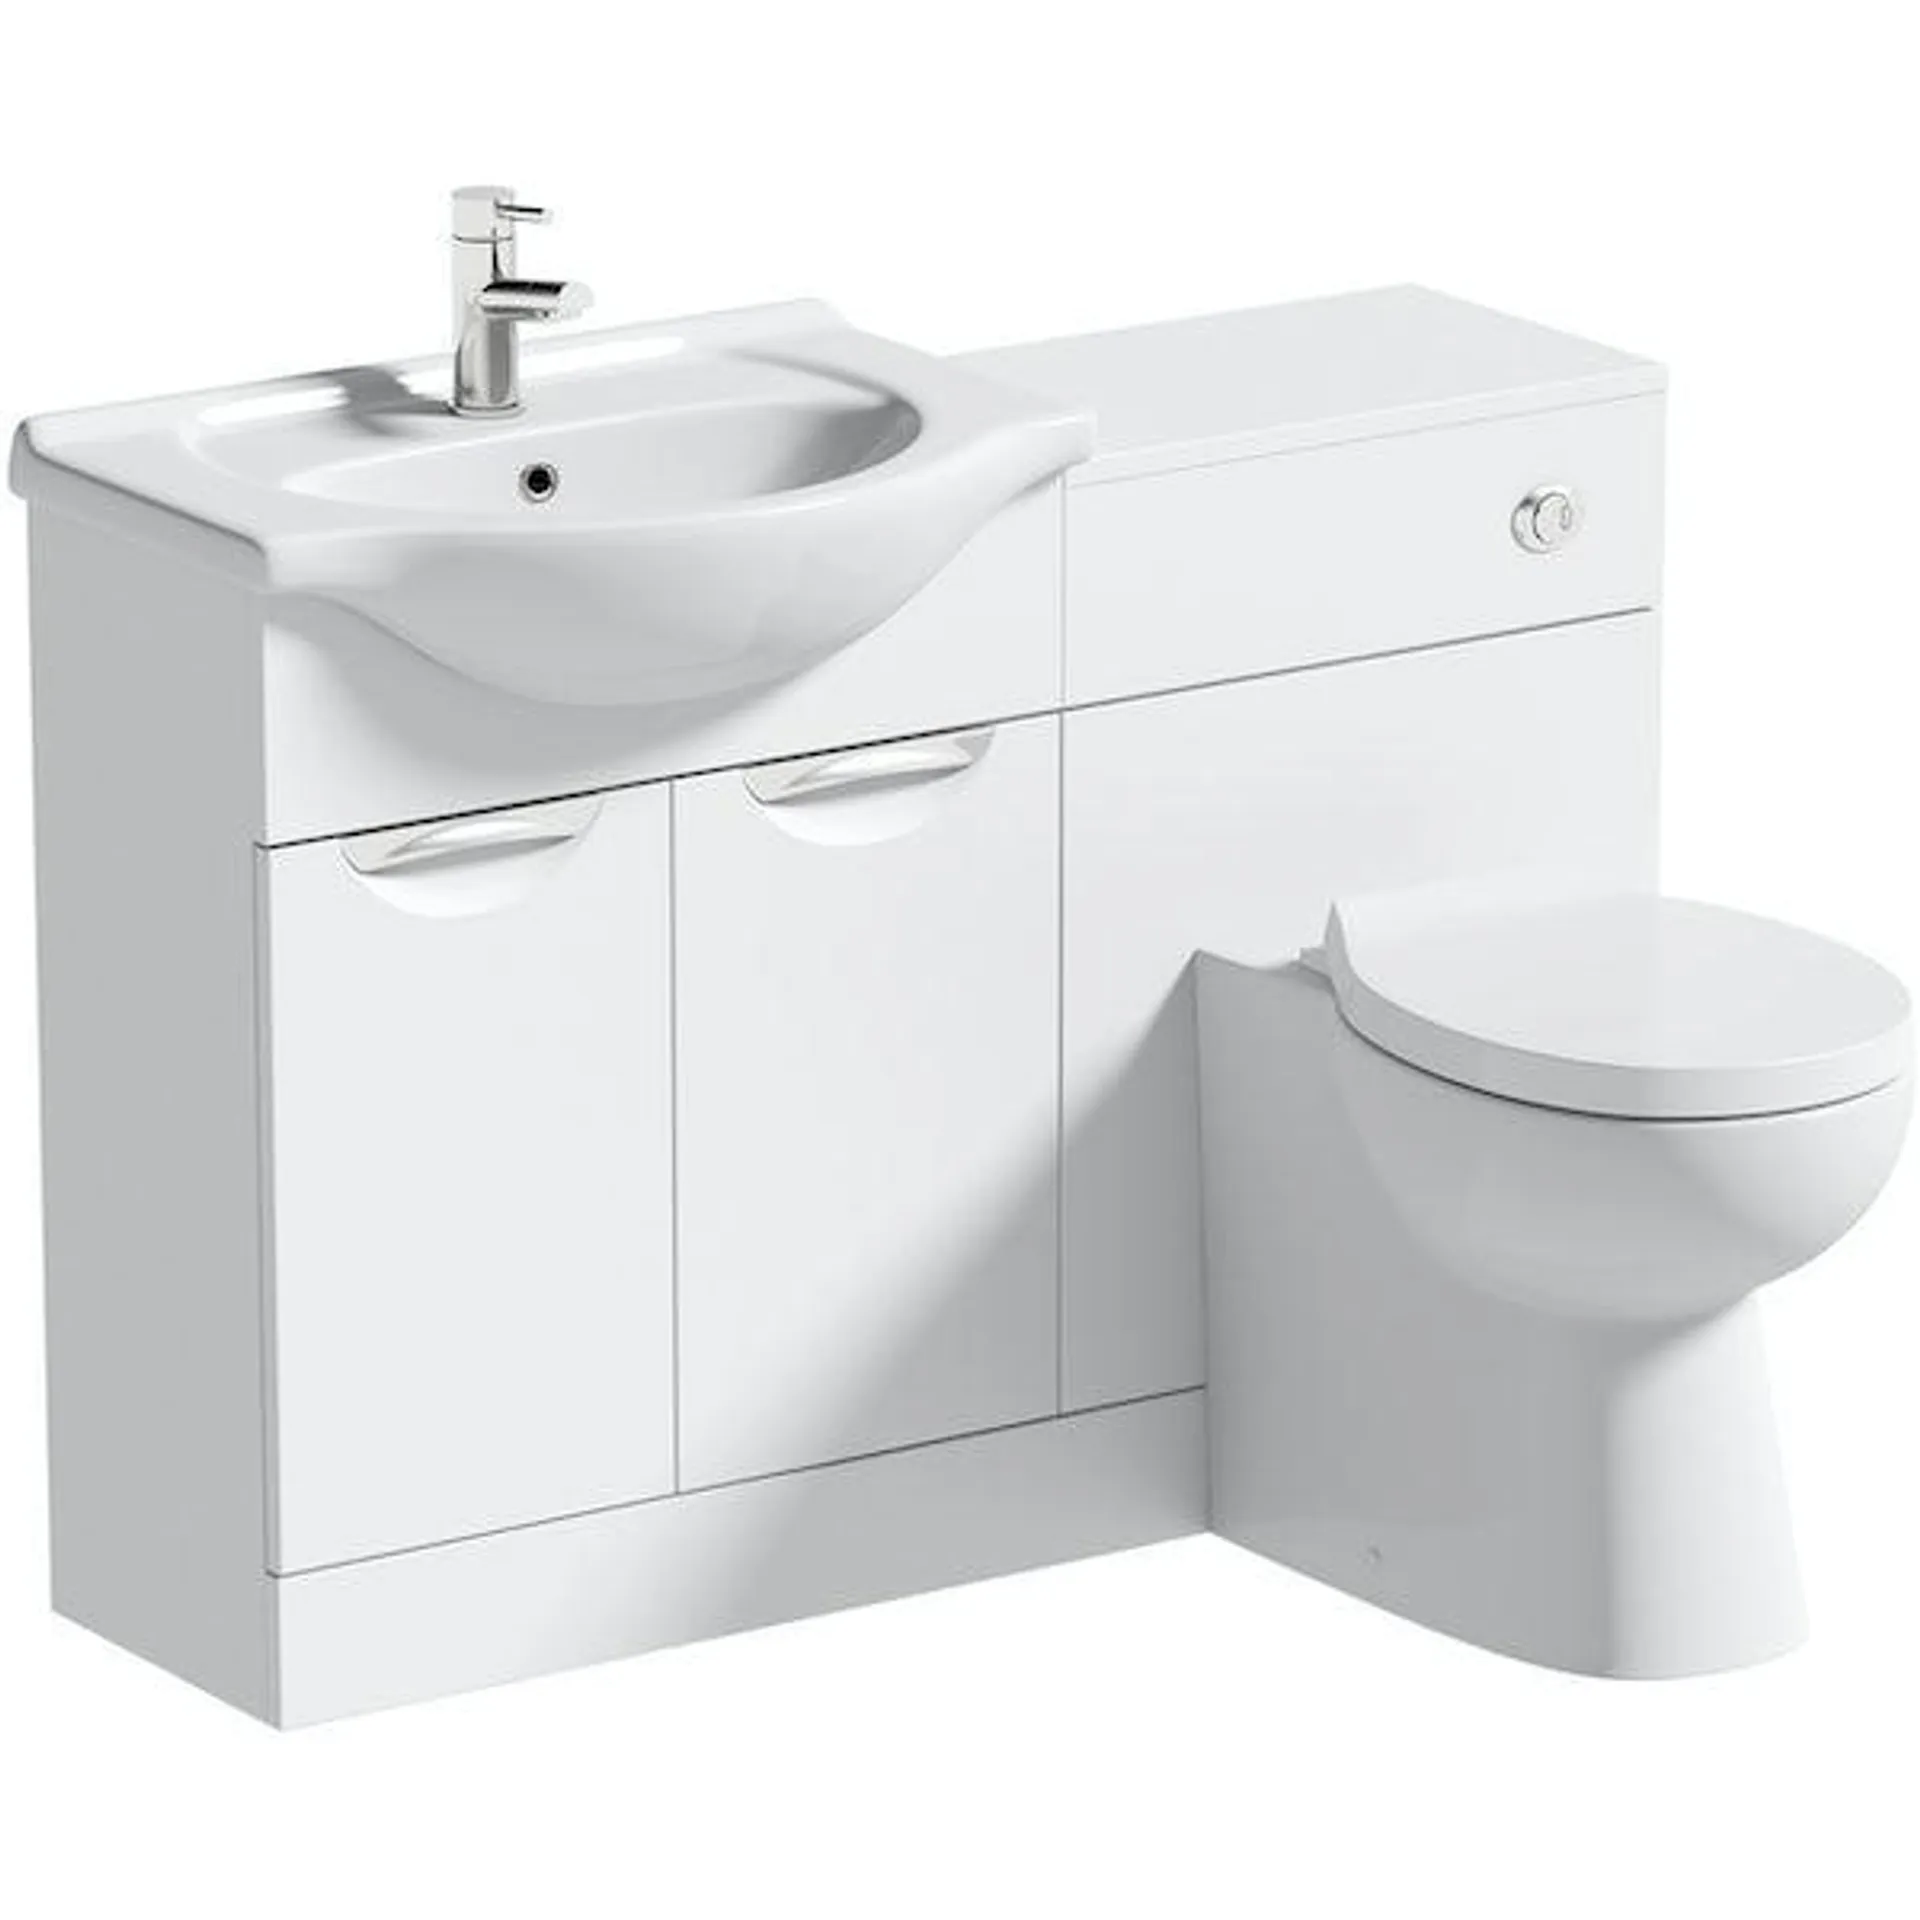 Orchard Elsdon white 1155mm combination with Clarity back to wall toilet and seat